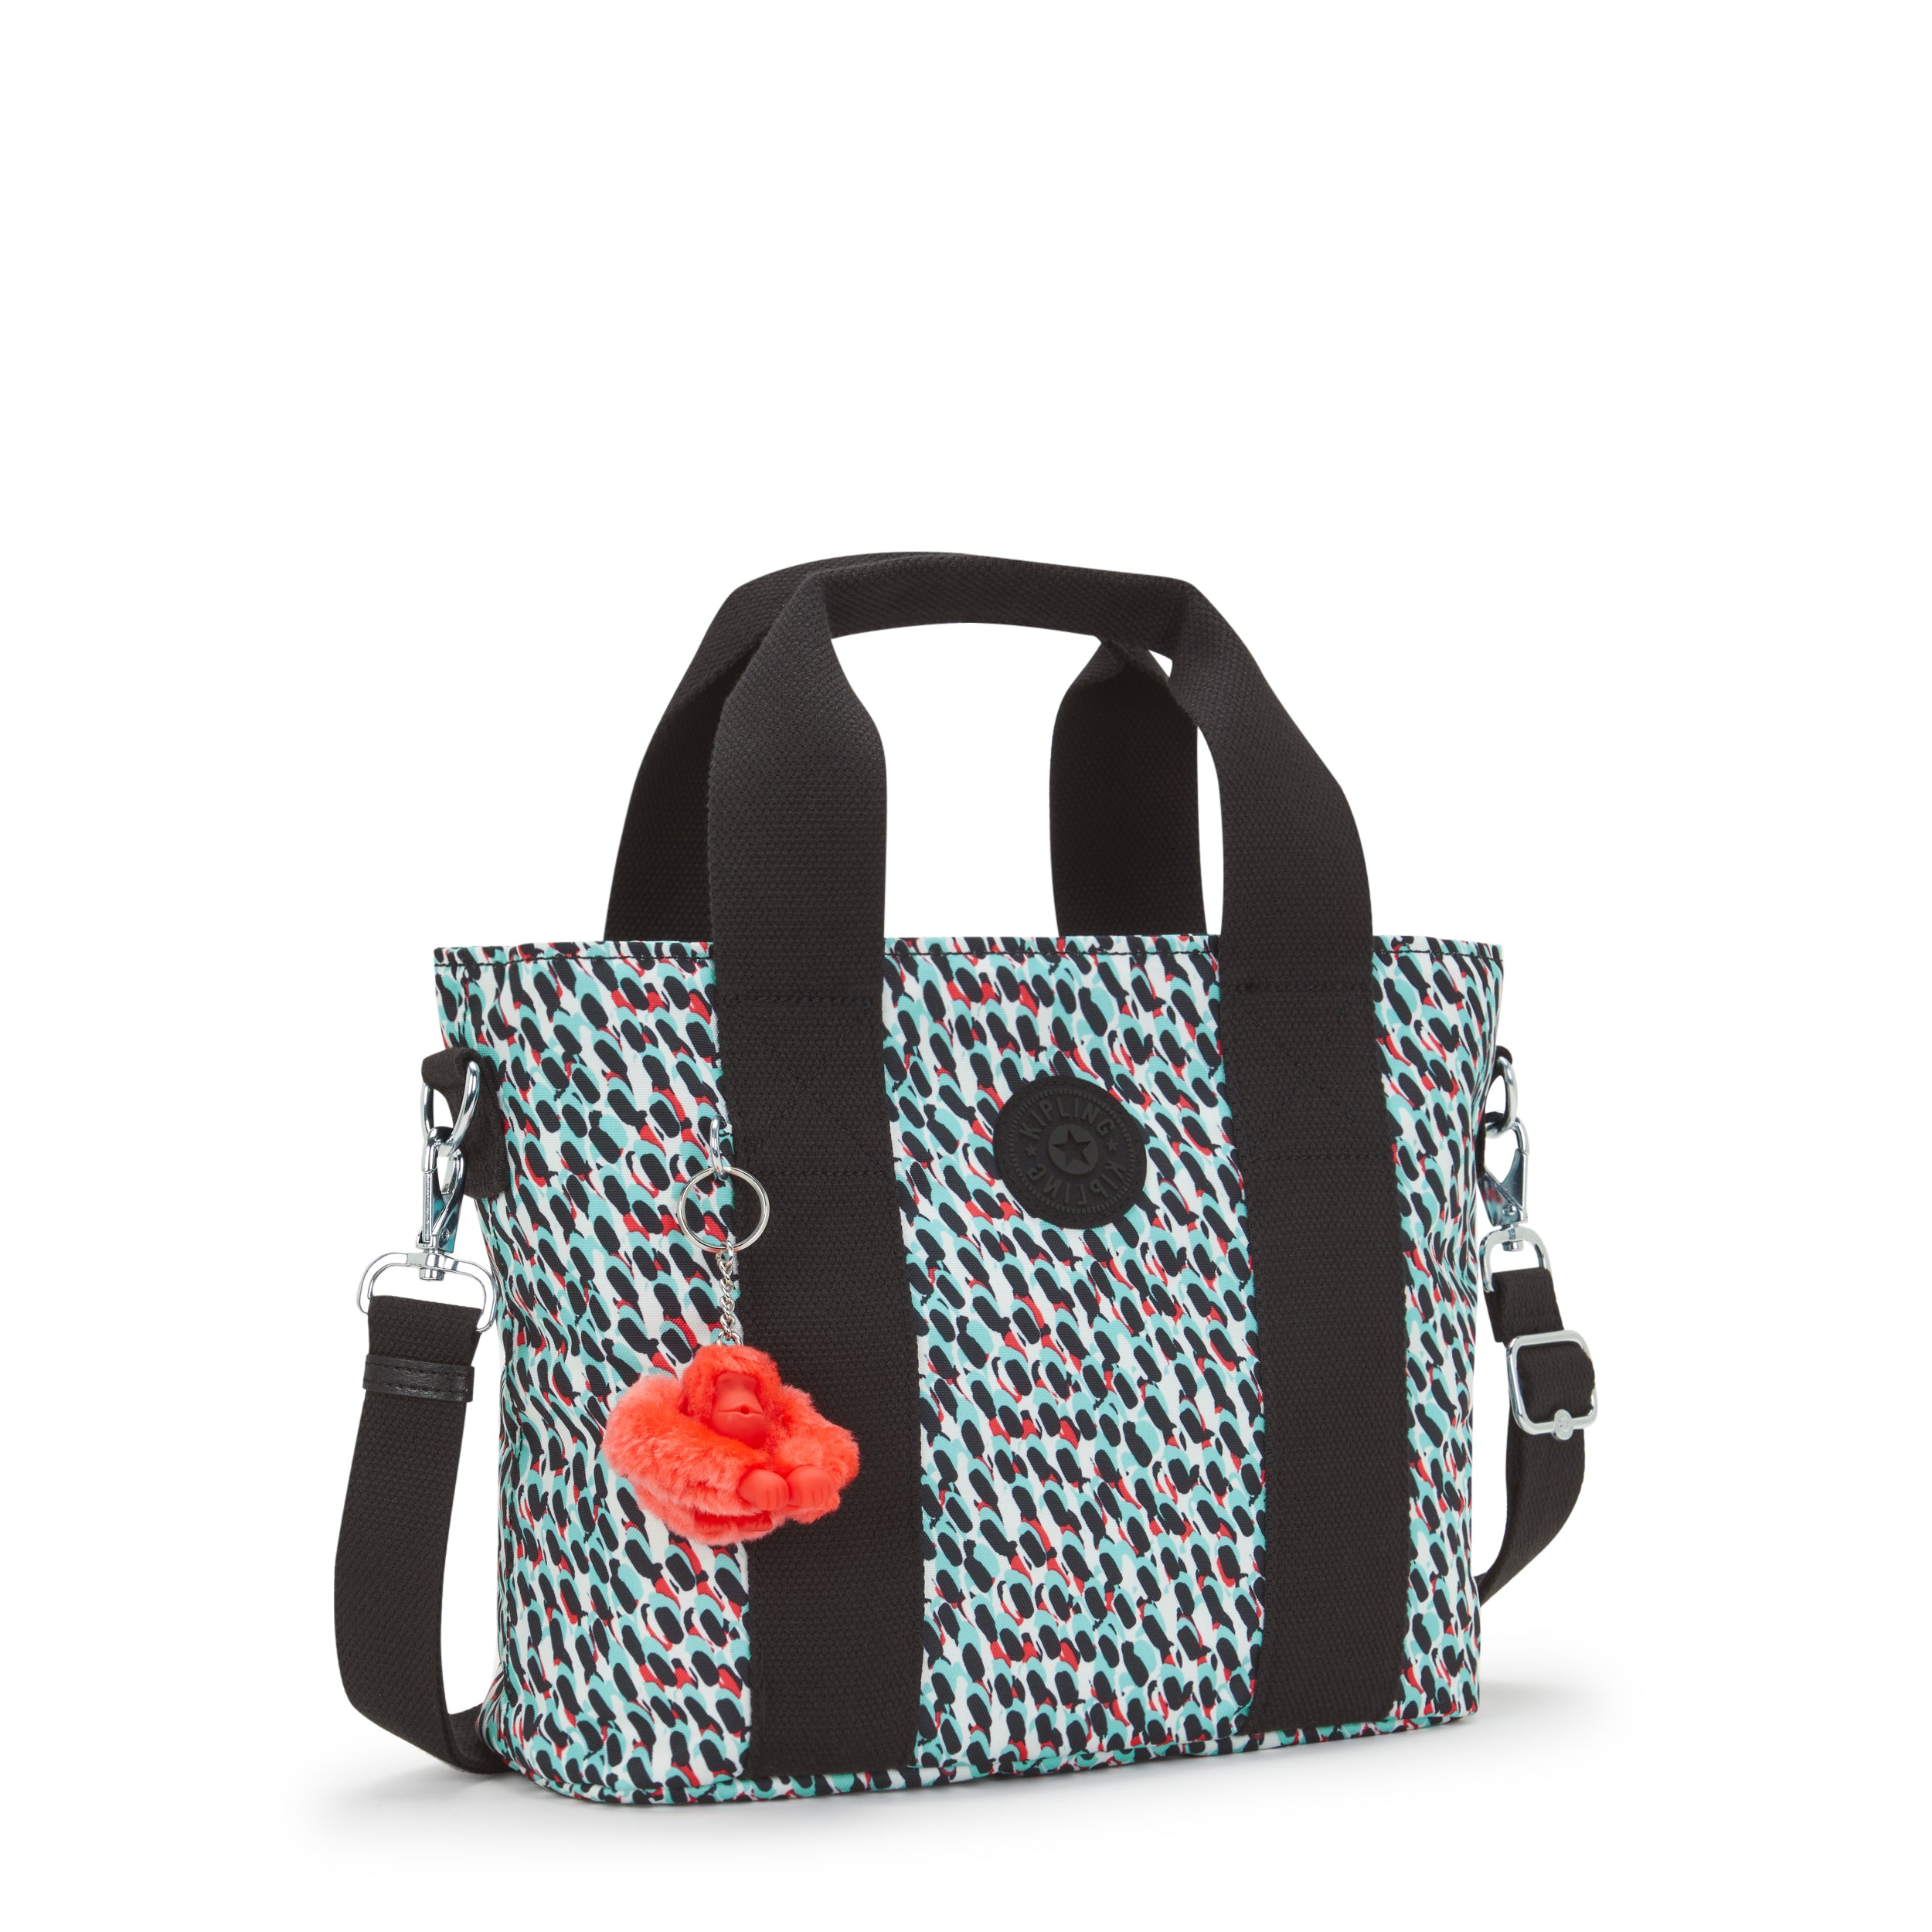 KIPLING-Minta M-Medium tote (with removable shoulderstrap)-Abstract Print-I7229-GN6